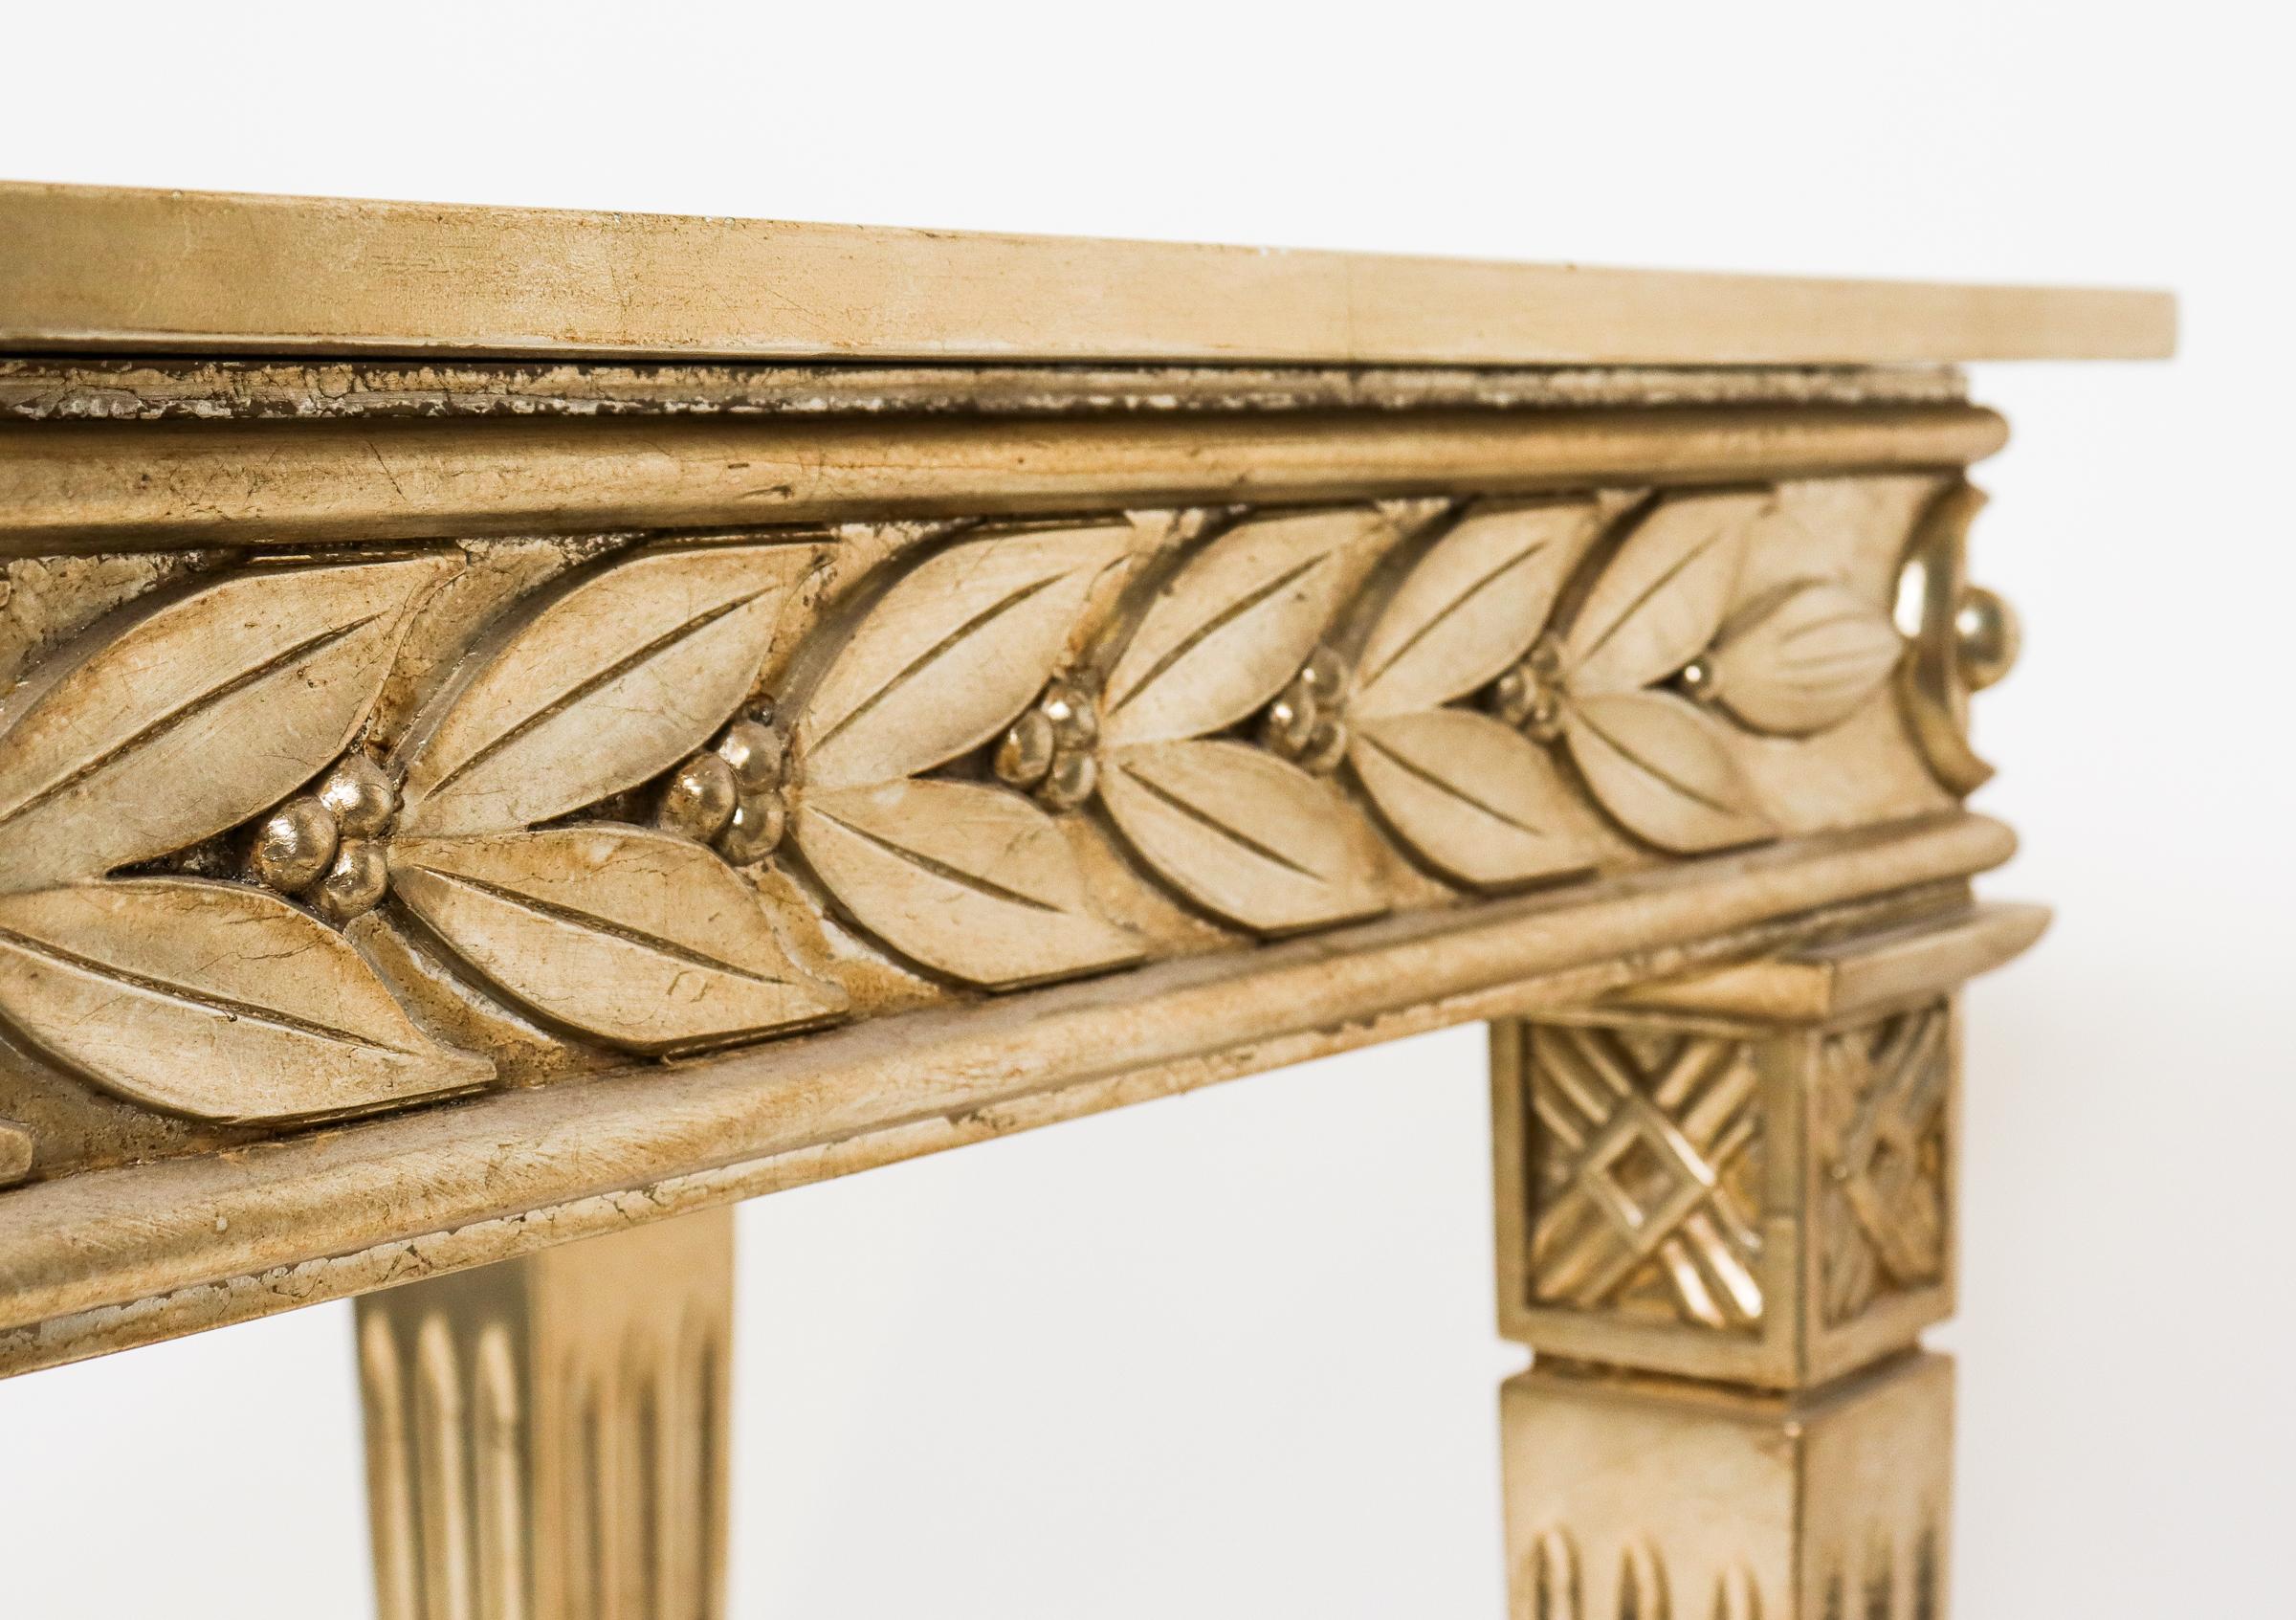 Italian Neoclassical Manner Silver-Gilt Console Table 1